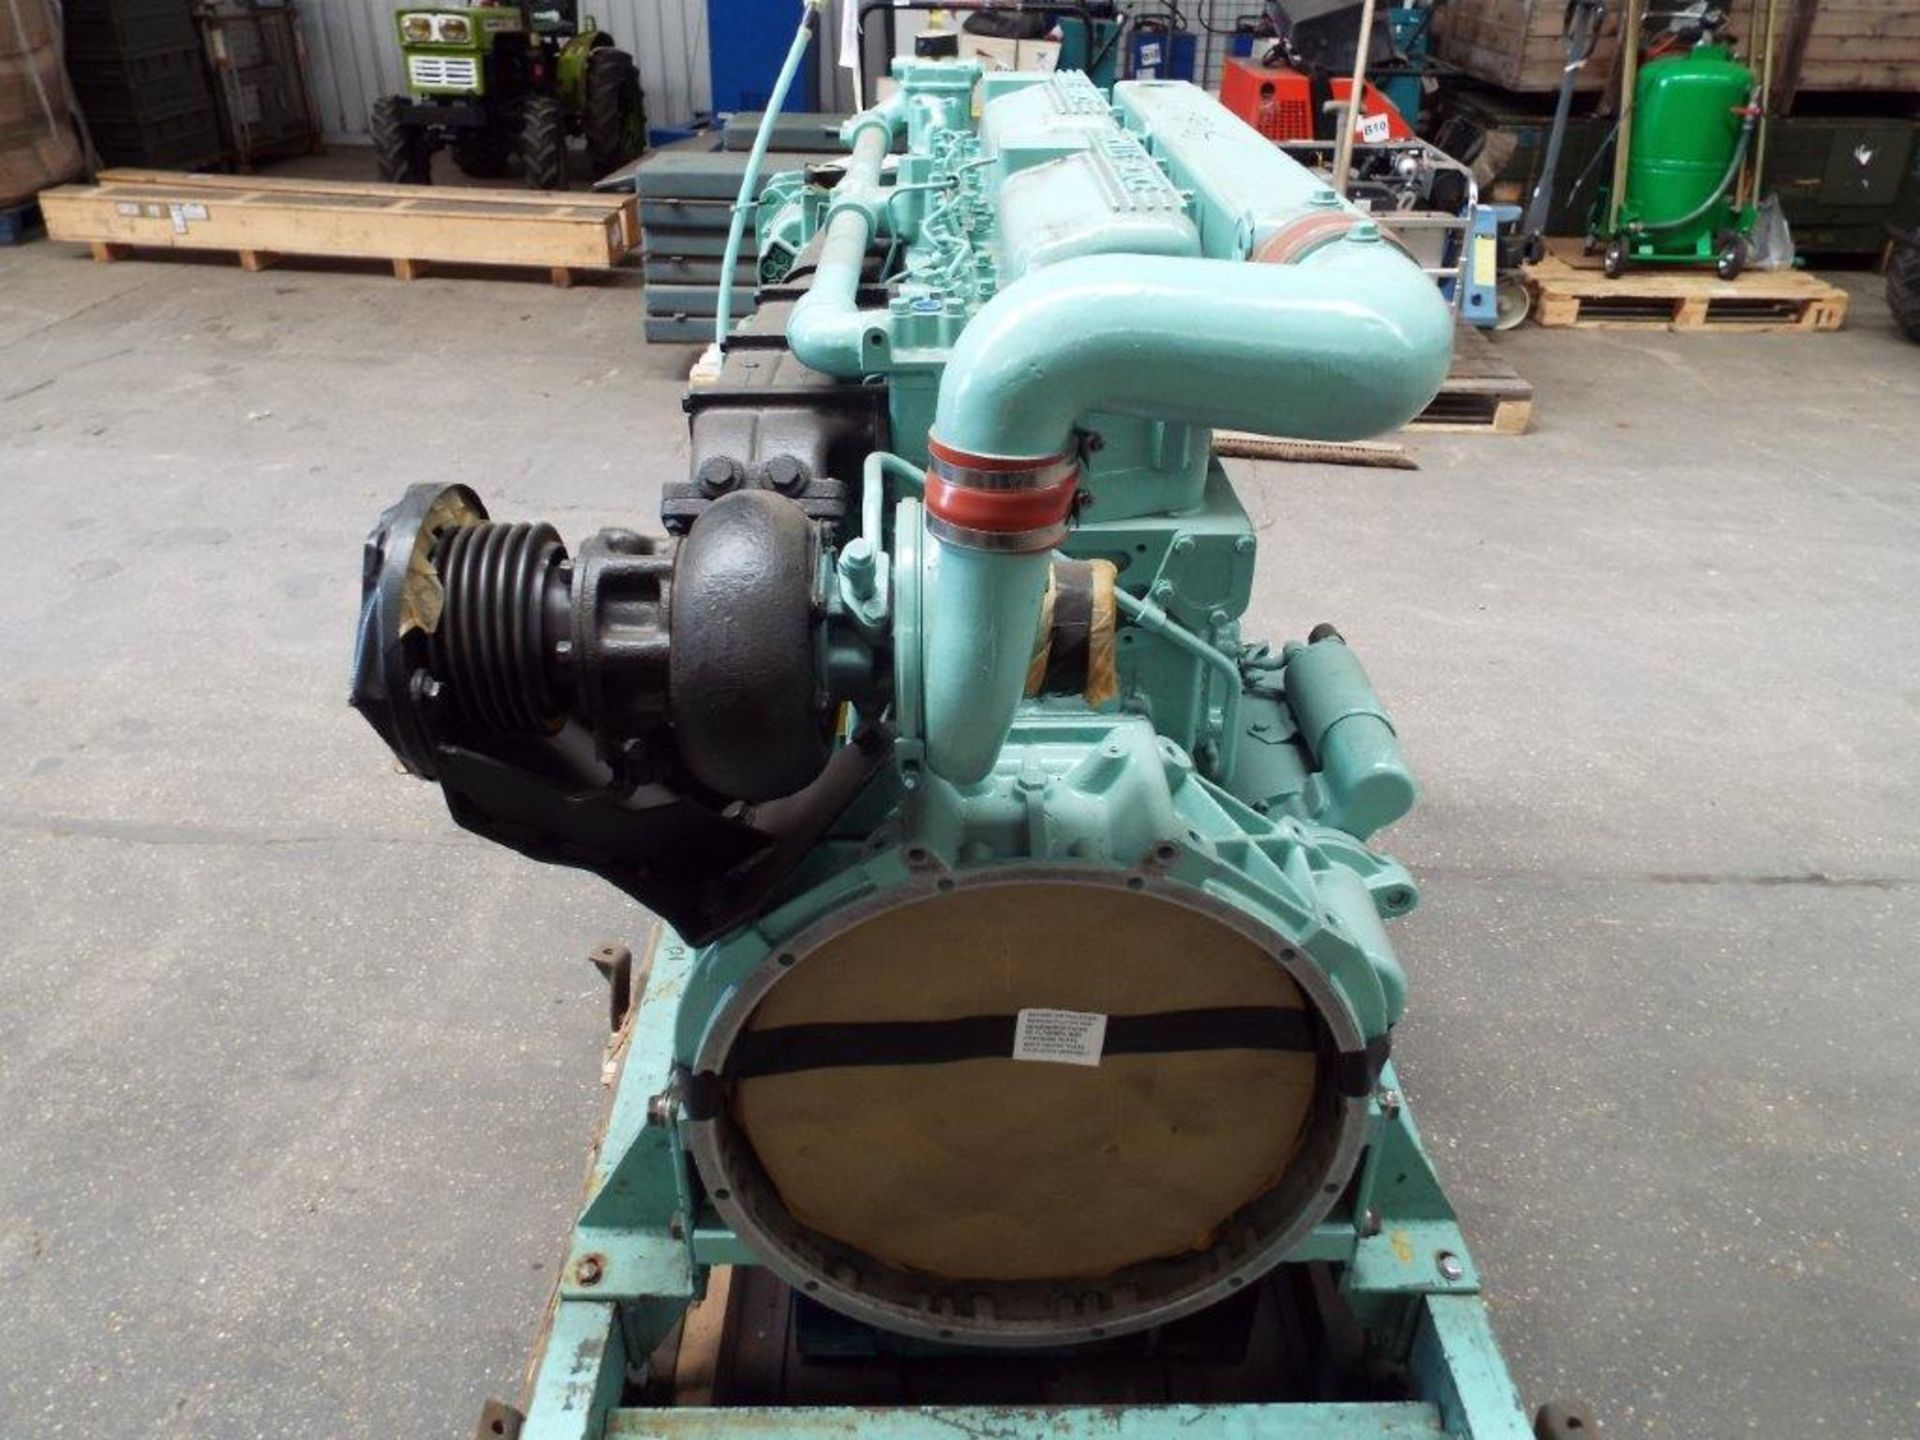 A1 Reconditioned Rolls Royce/Perkins 290L Straight 6 Turbo Diesel Engine for Foden Recovery Vehicles - Image 6 of 20